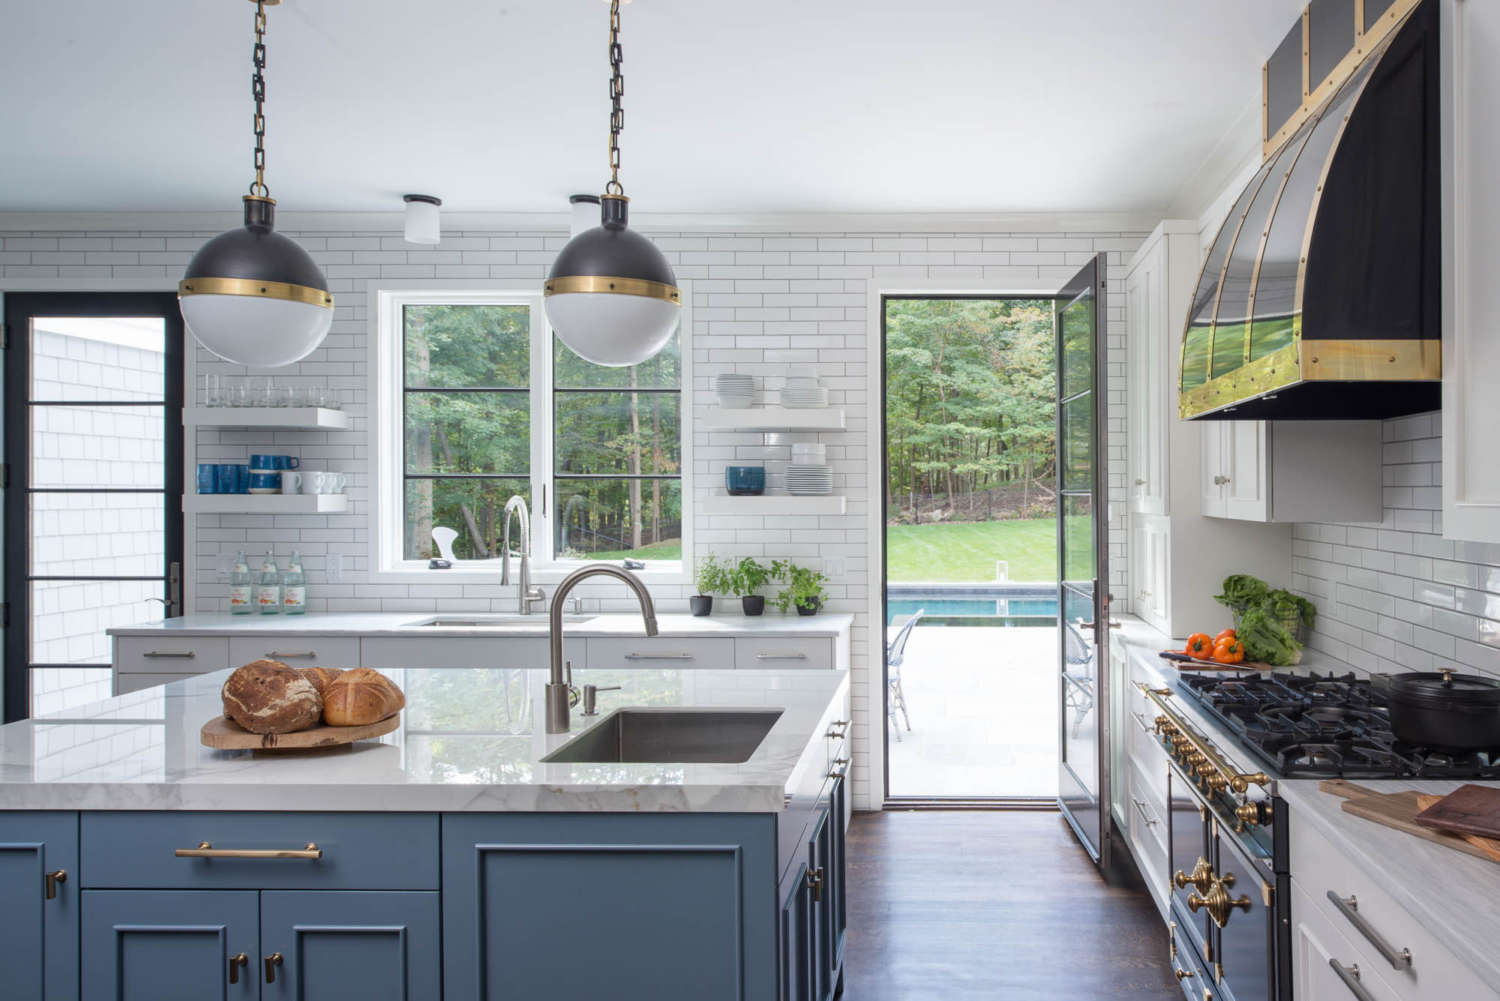 White kitchen gets a pop of color from a Benjamin Moore Blue Toile painted center island.